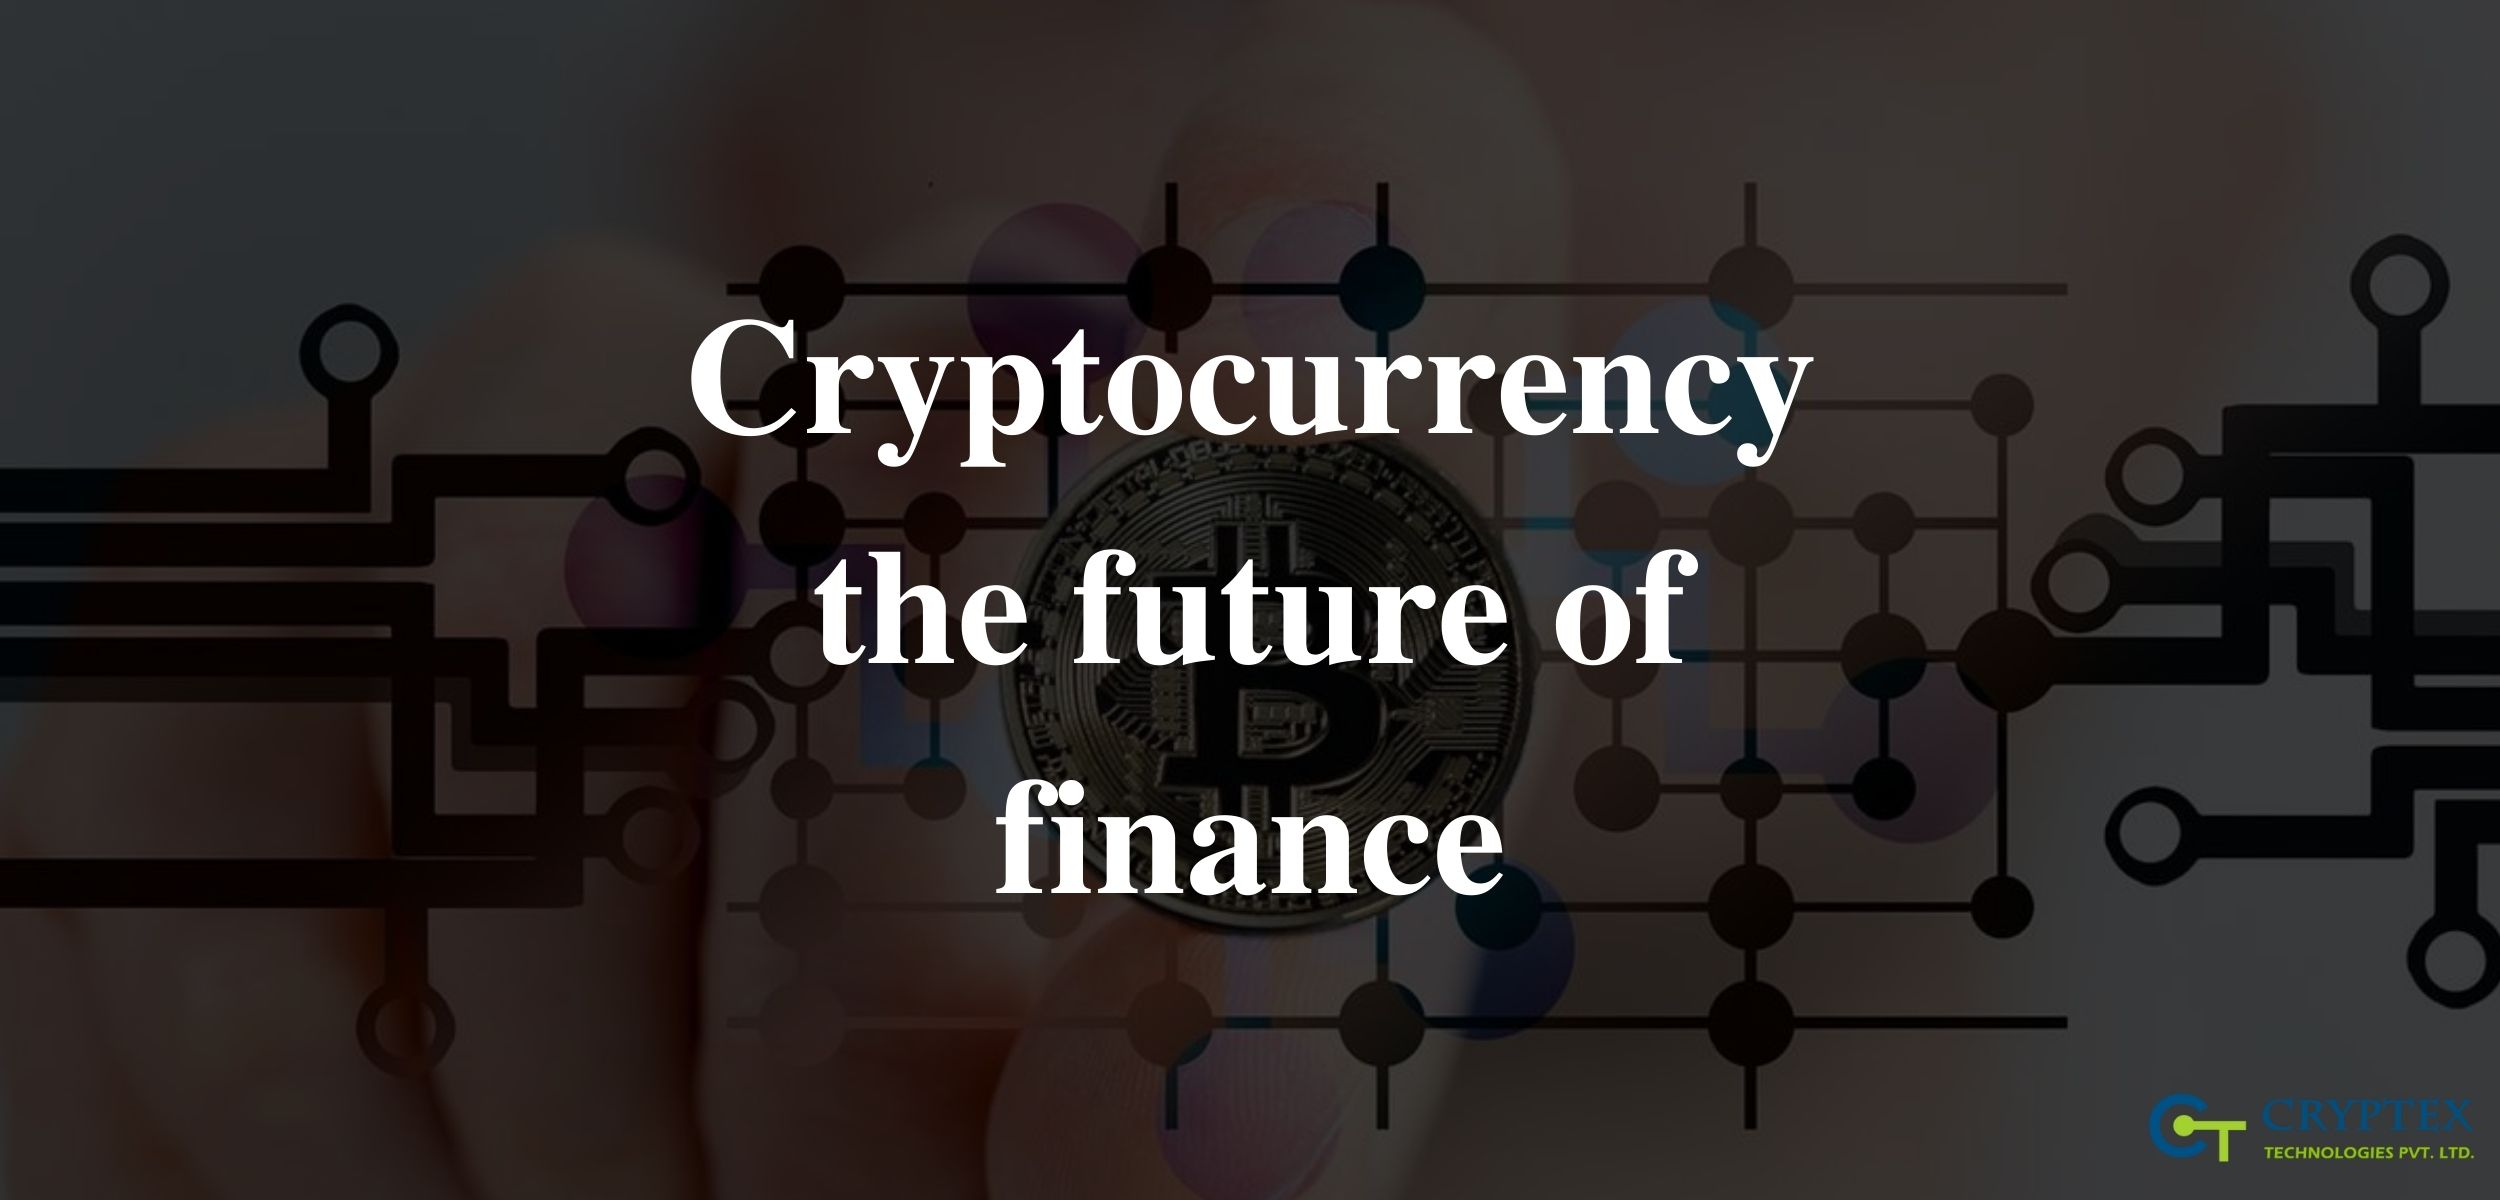 Article about Cryptocurrency - The Future Of Finance